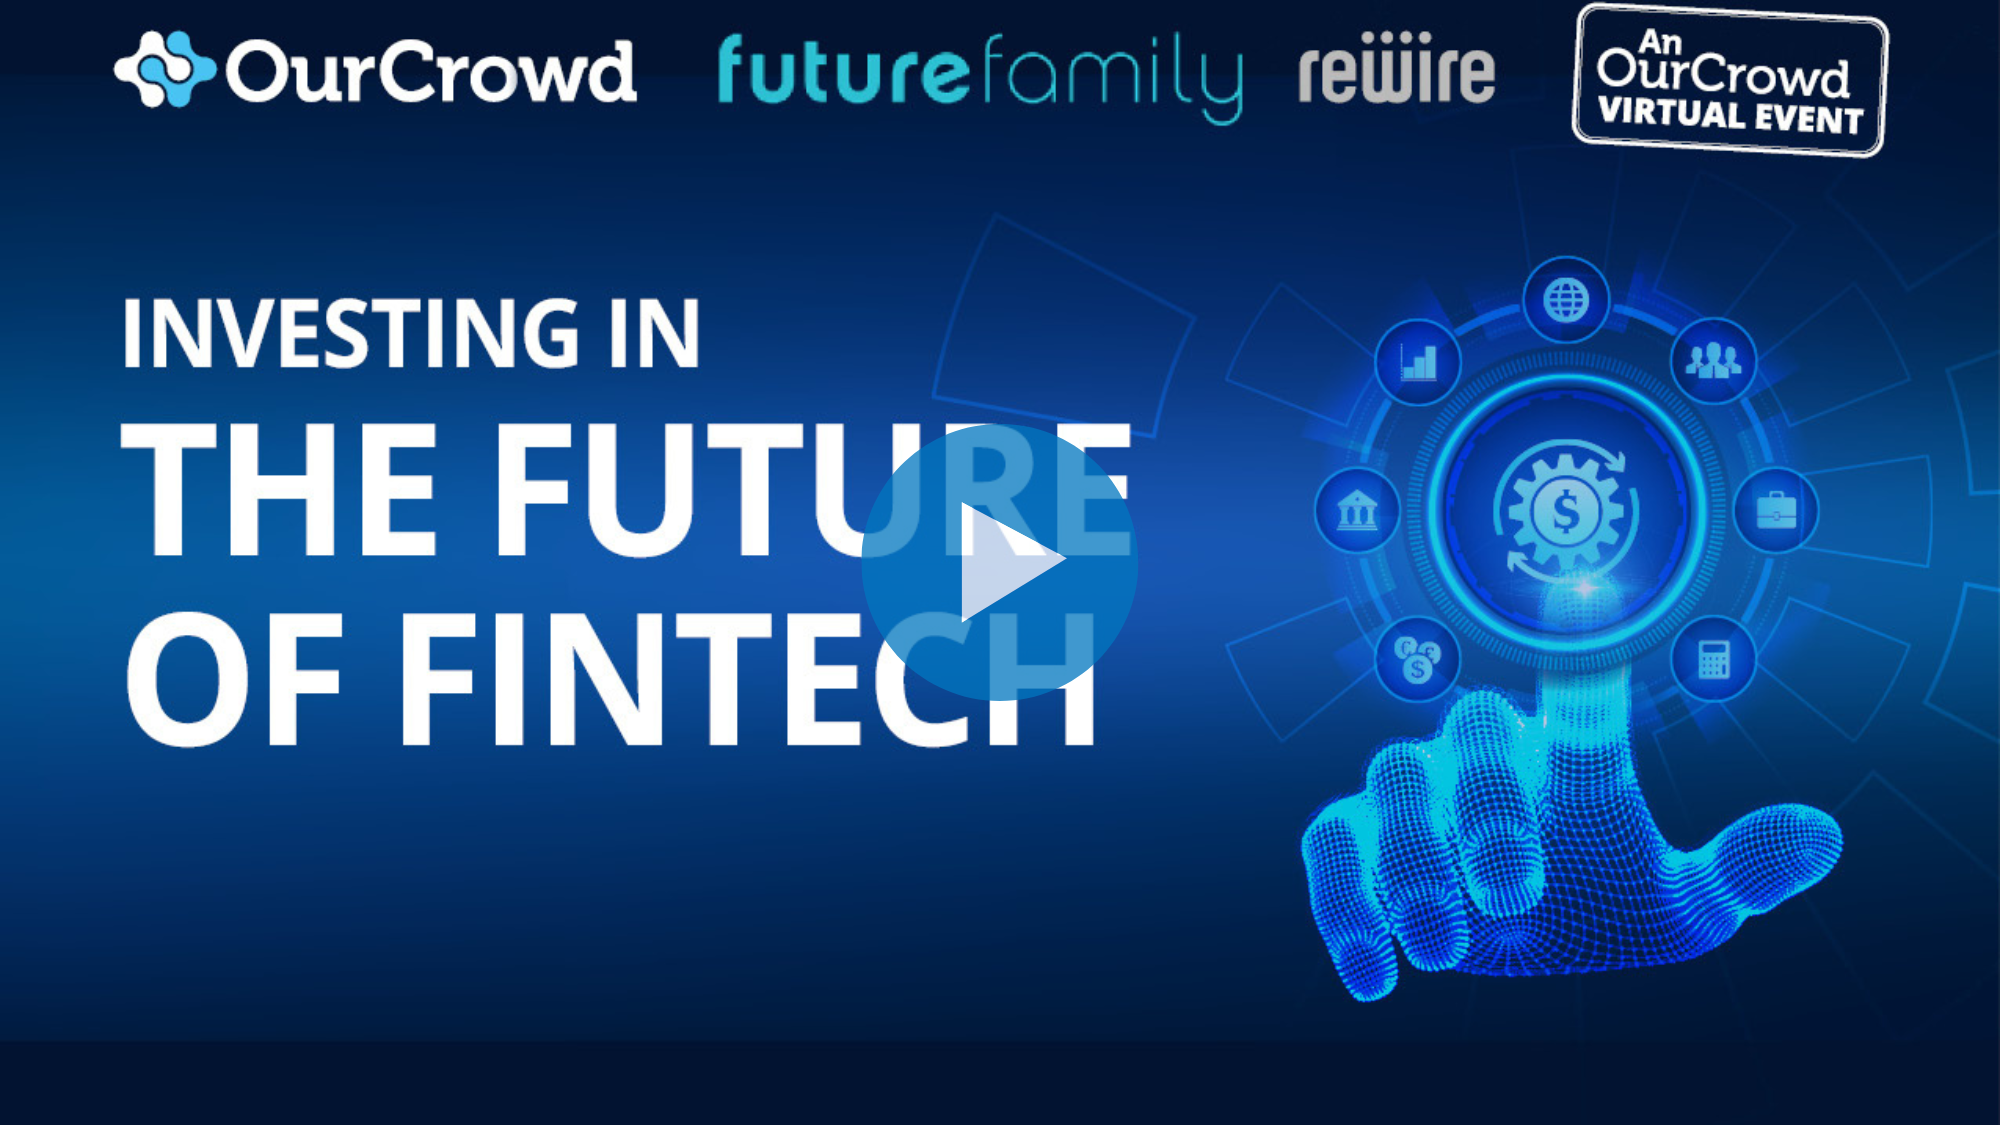 Invest in FinTech OurCrowd virtual event